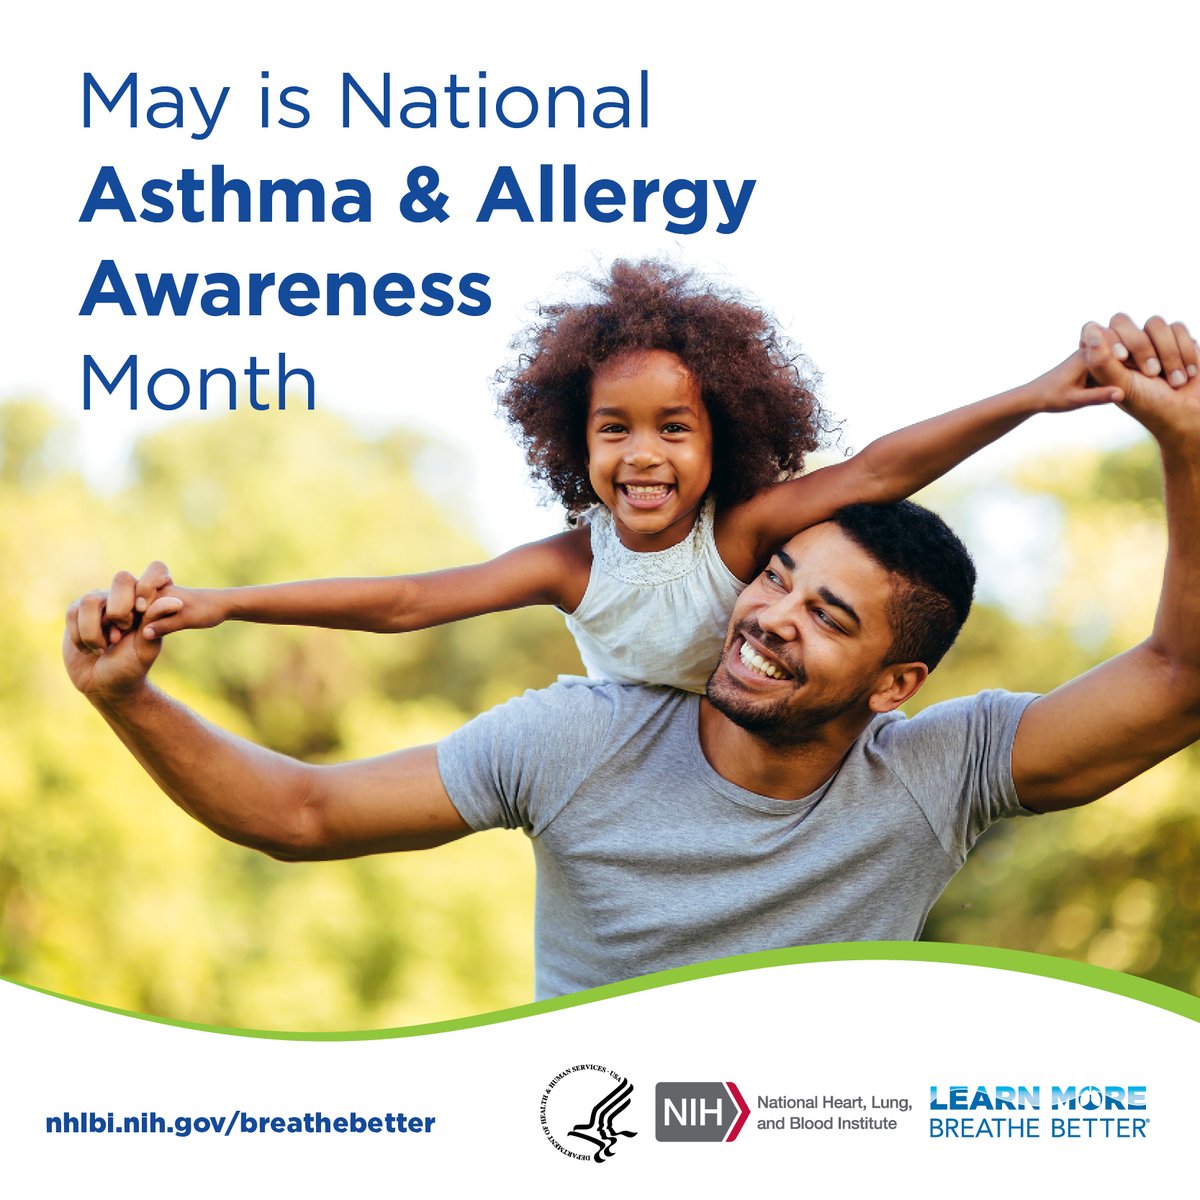 As of 2021, almost 1 out of every 9 people in MA have asthma. May is #AsthmaAwarenessMonth. Learn more about what the DPH Asthma Prevention and Control Program is doing to help people with asthma lead full, active lives: ow.ly/XHM650RmrE1 #AsthmaAwarenessMonth